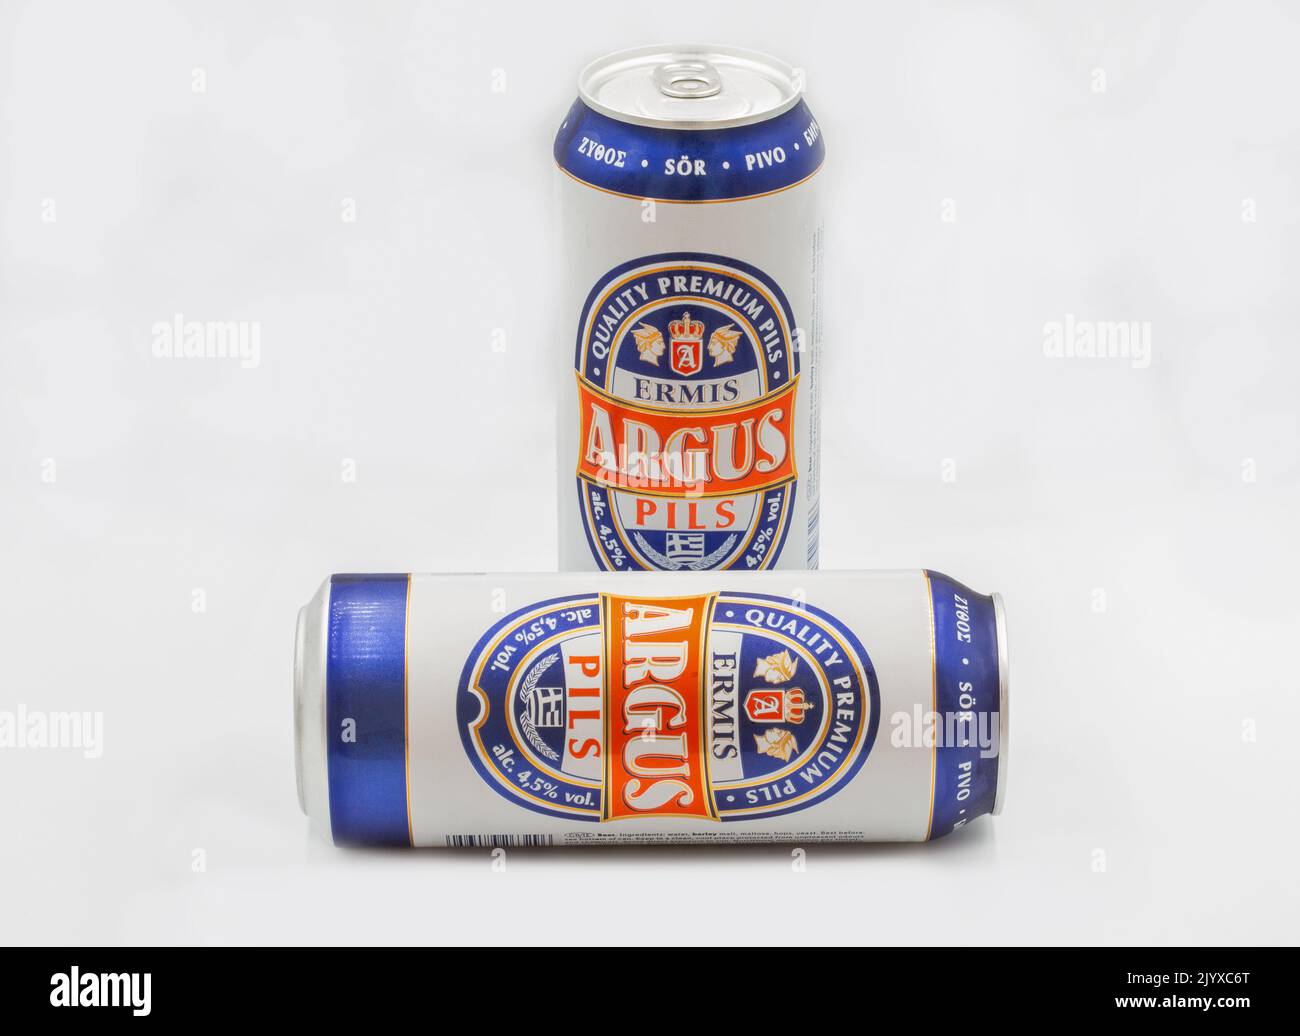 Corfu, Greece - August 02, 2021: Studio shoot of Argus Ermis beer cans closeup on white. It is a Lidl supermarket own brand beer. Stock Photo